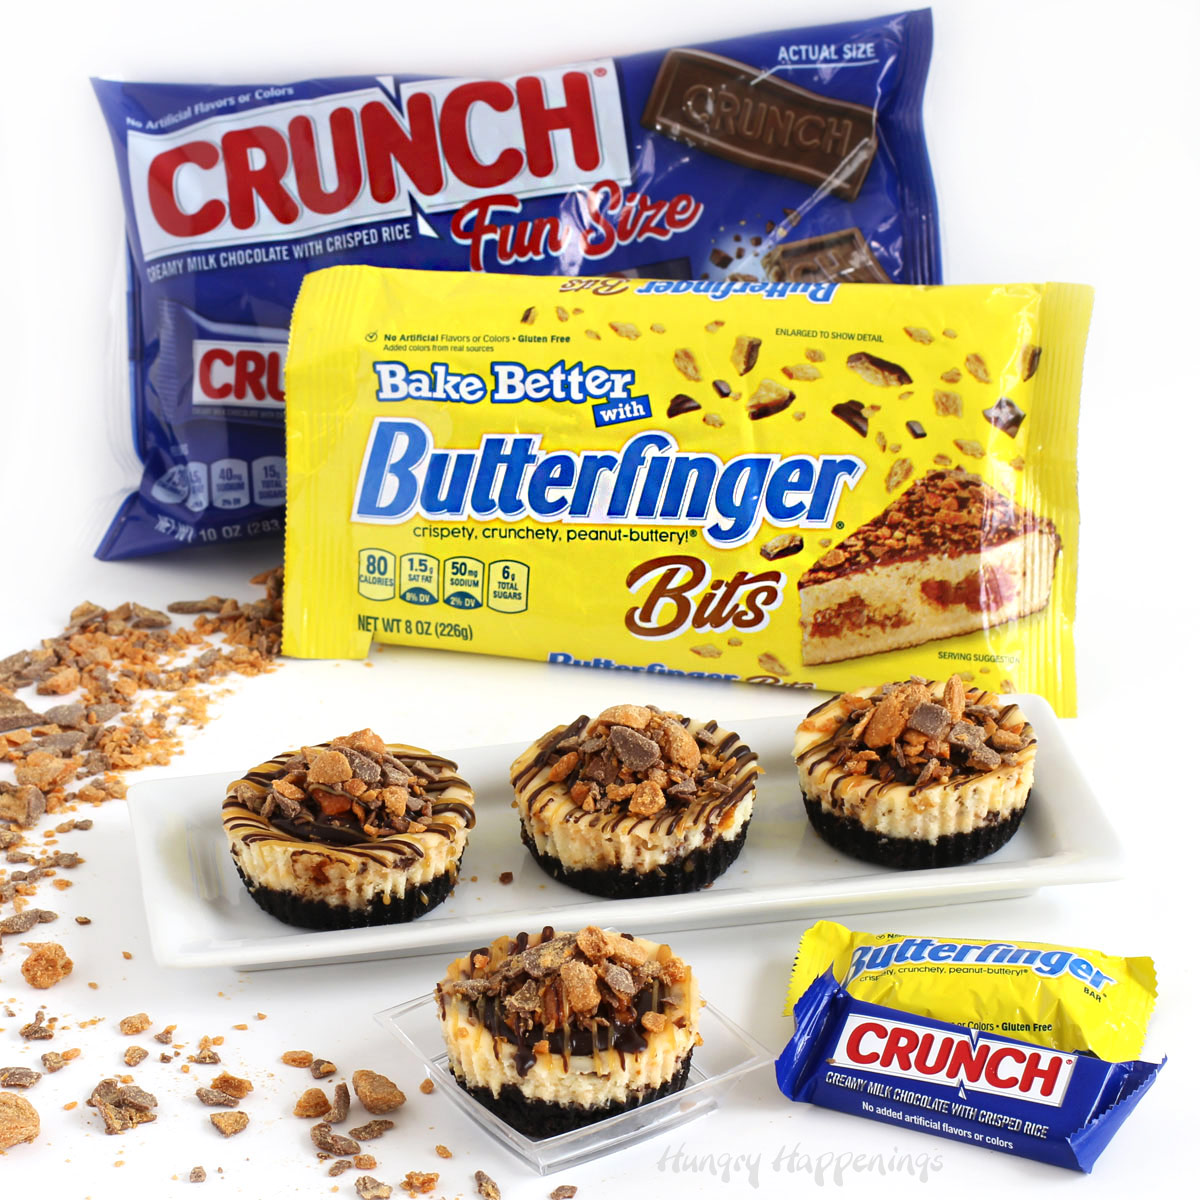 Mini Butter finger Cheesecakes drizzled with chocolate ganache and peanut butter displayed with Nestle Crunch bars and Butterfinger Bars.